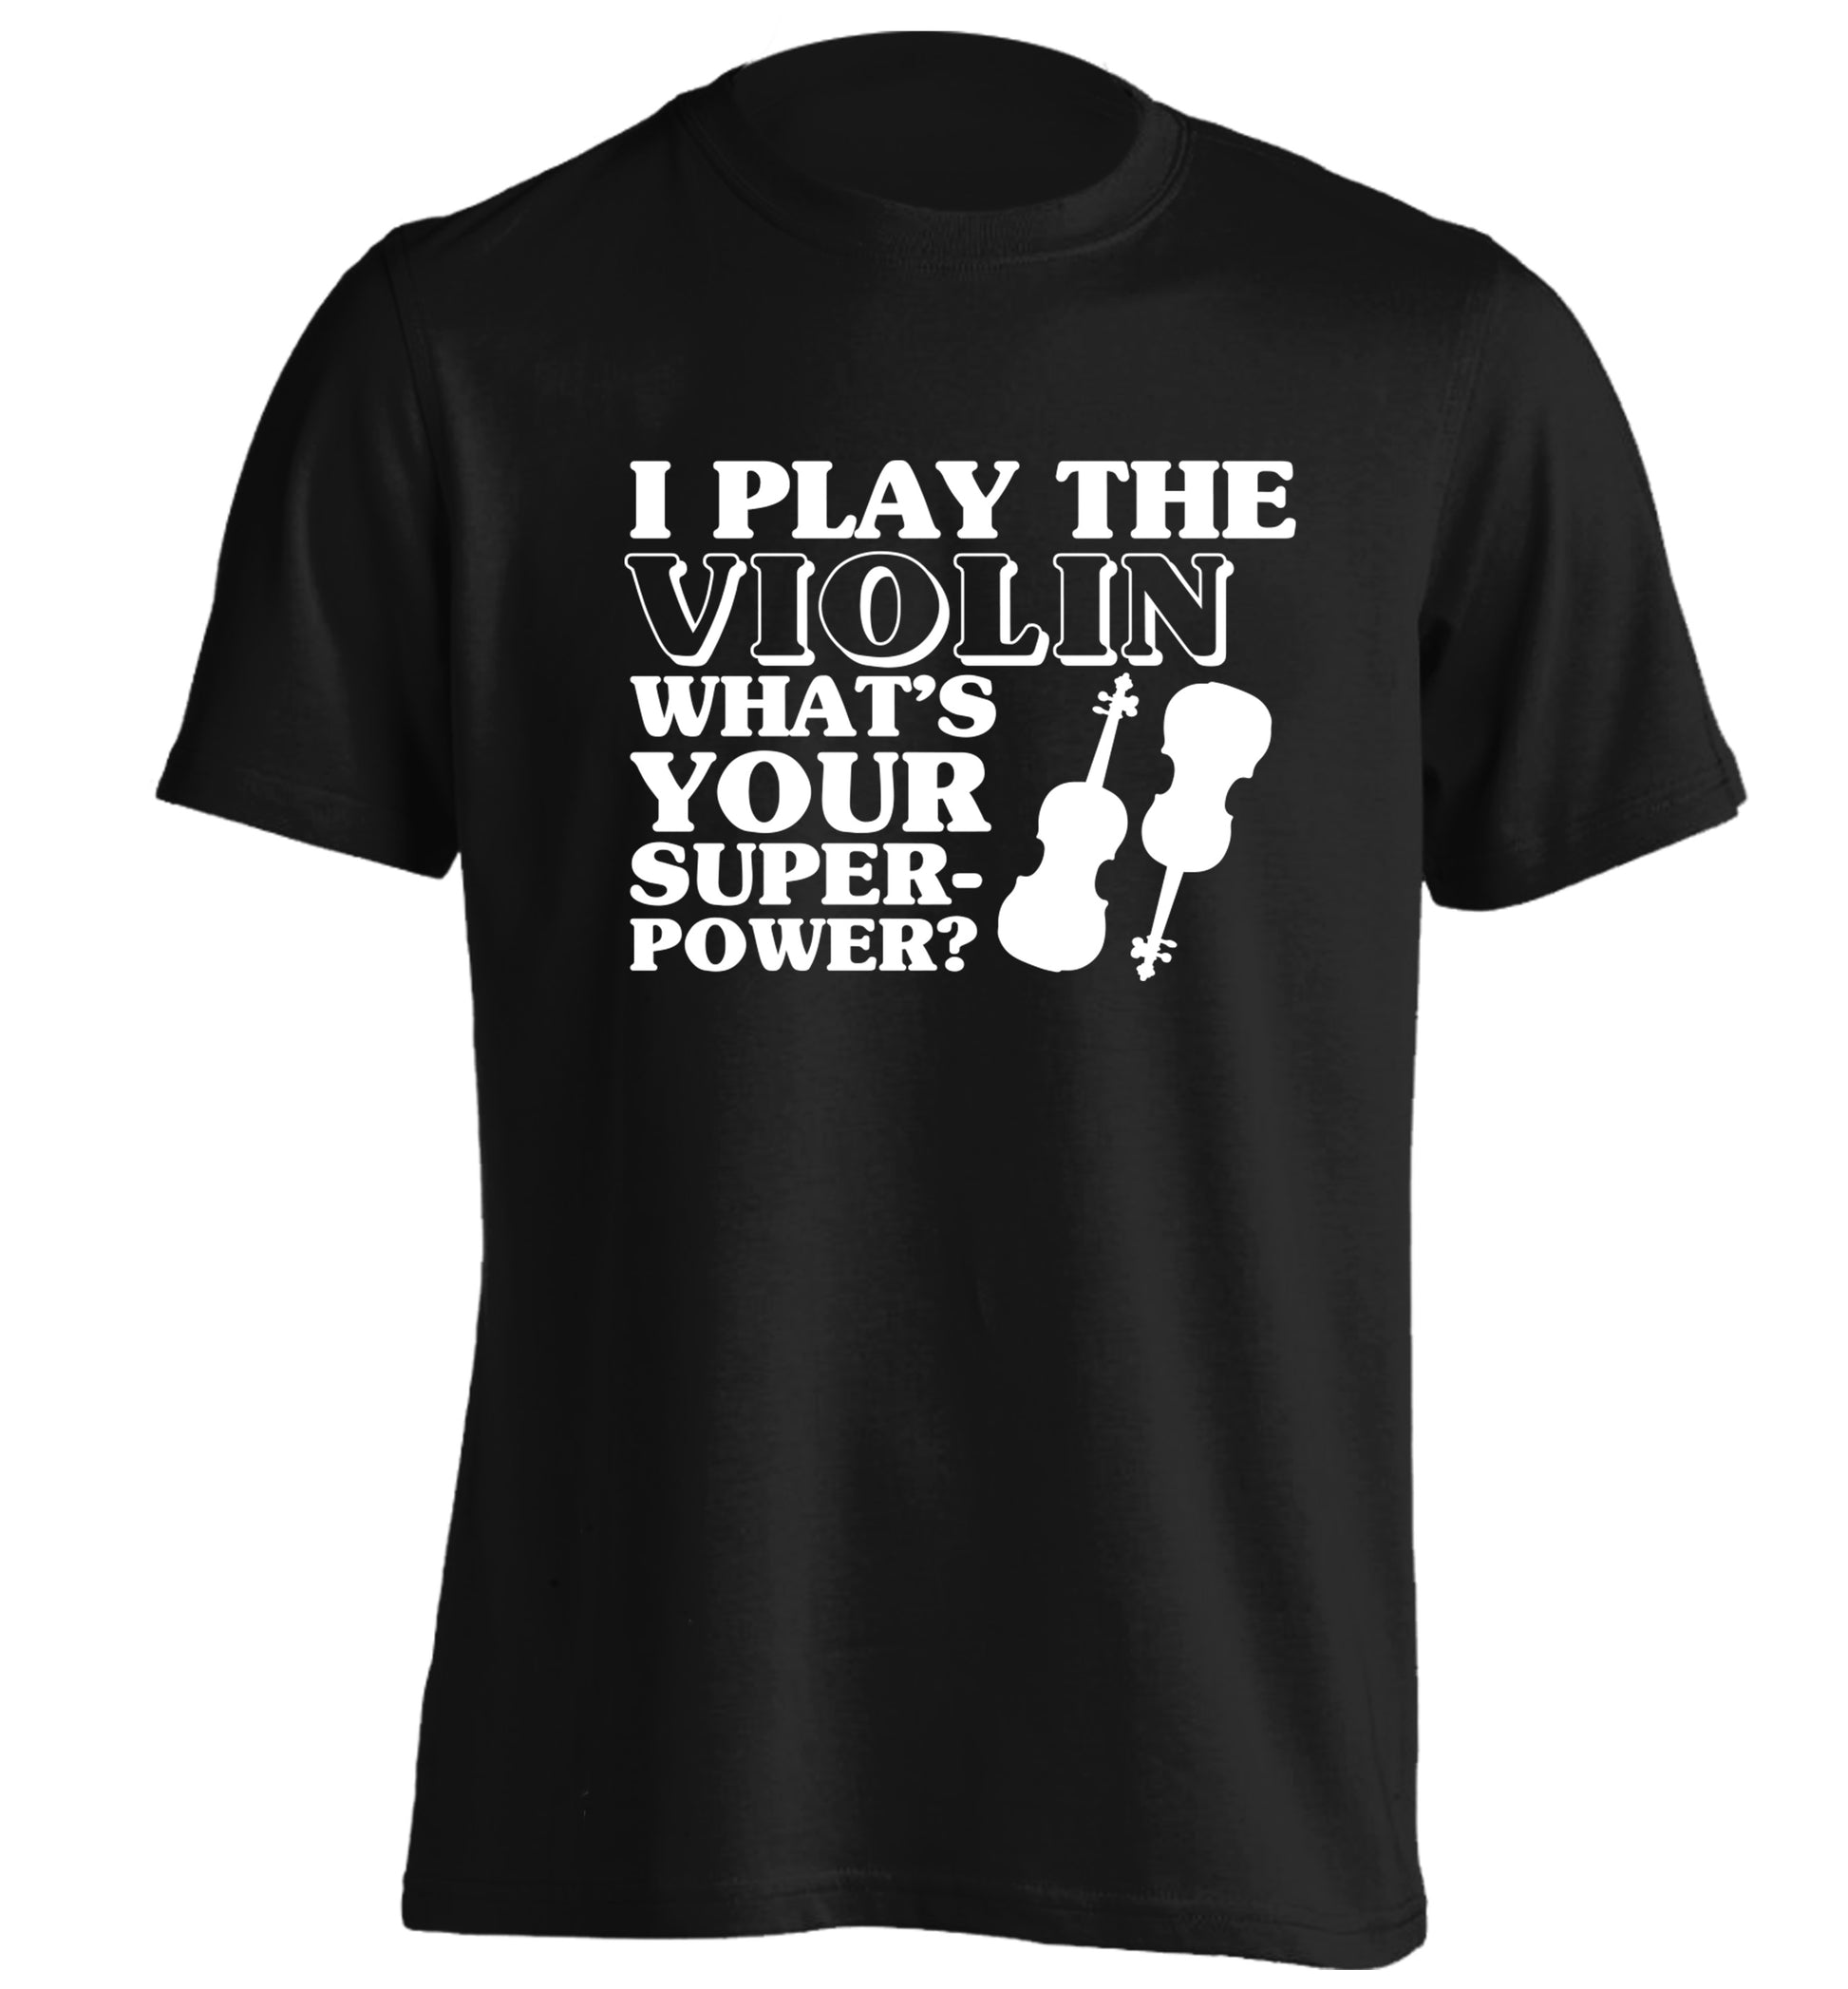 I Play Violin What's Your Superpower? adults unisex black Tshirt 2XL